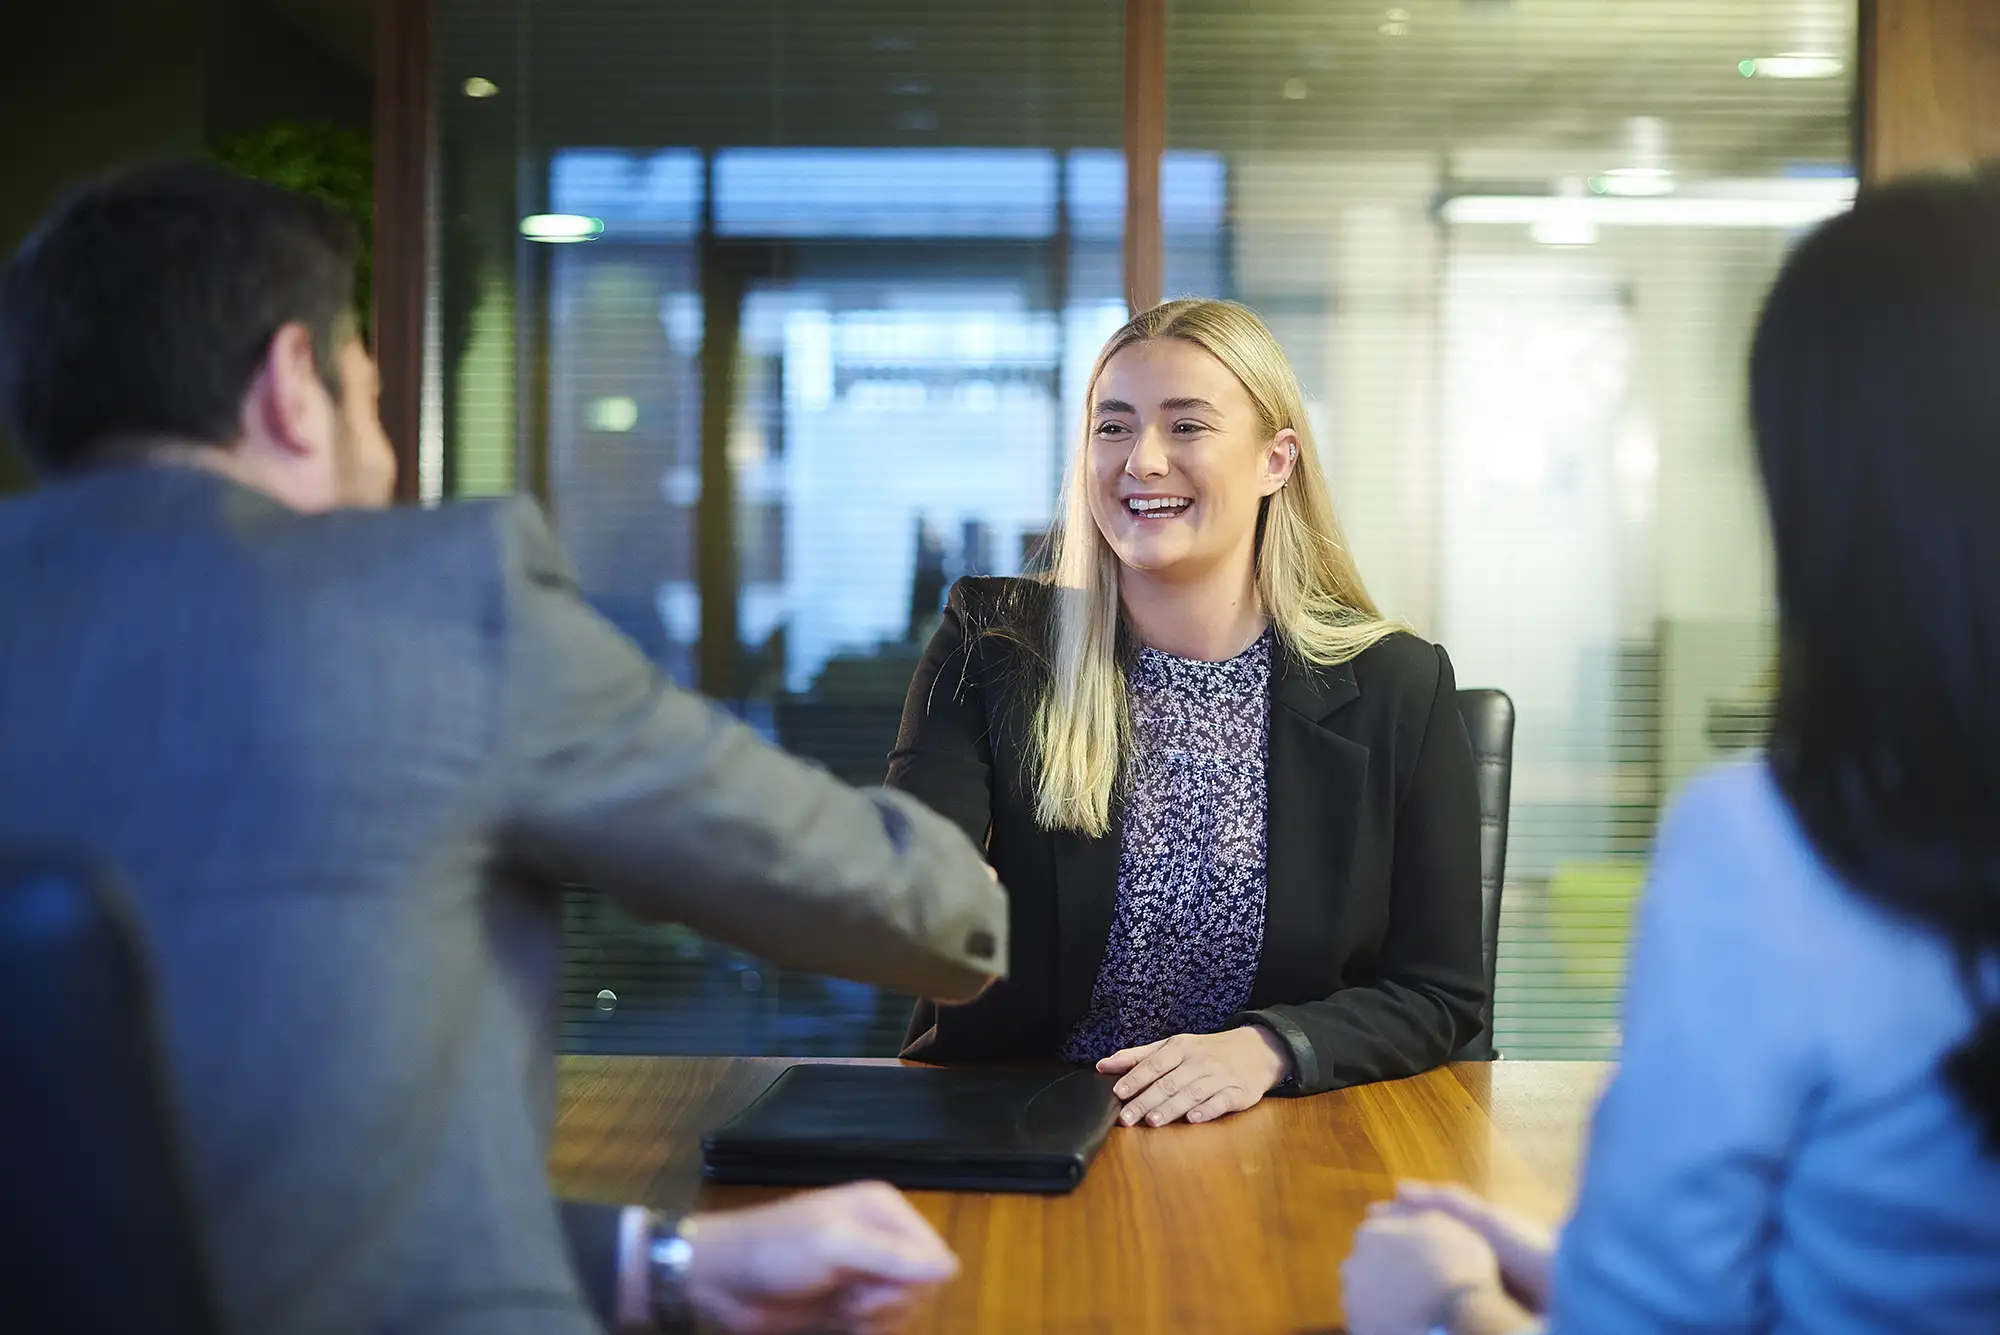 5 must-haves for interview success